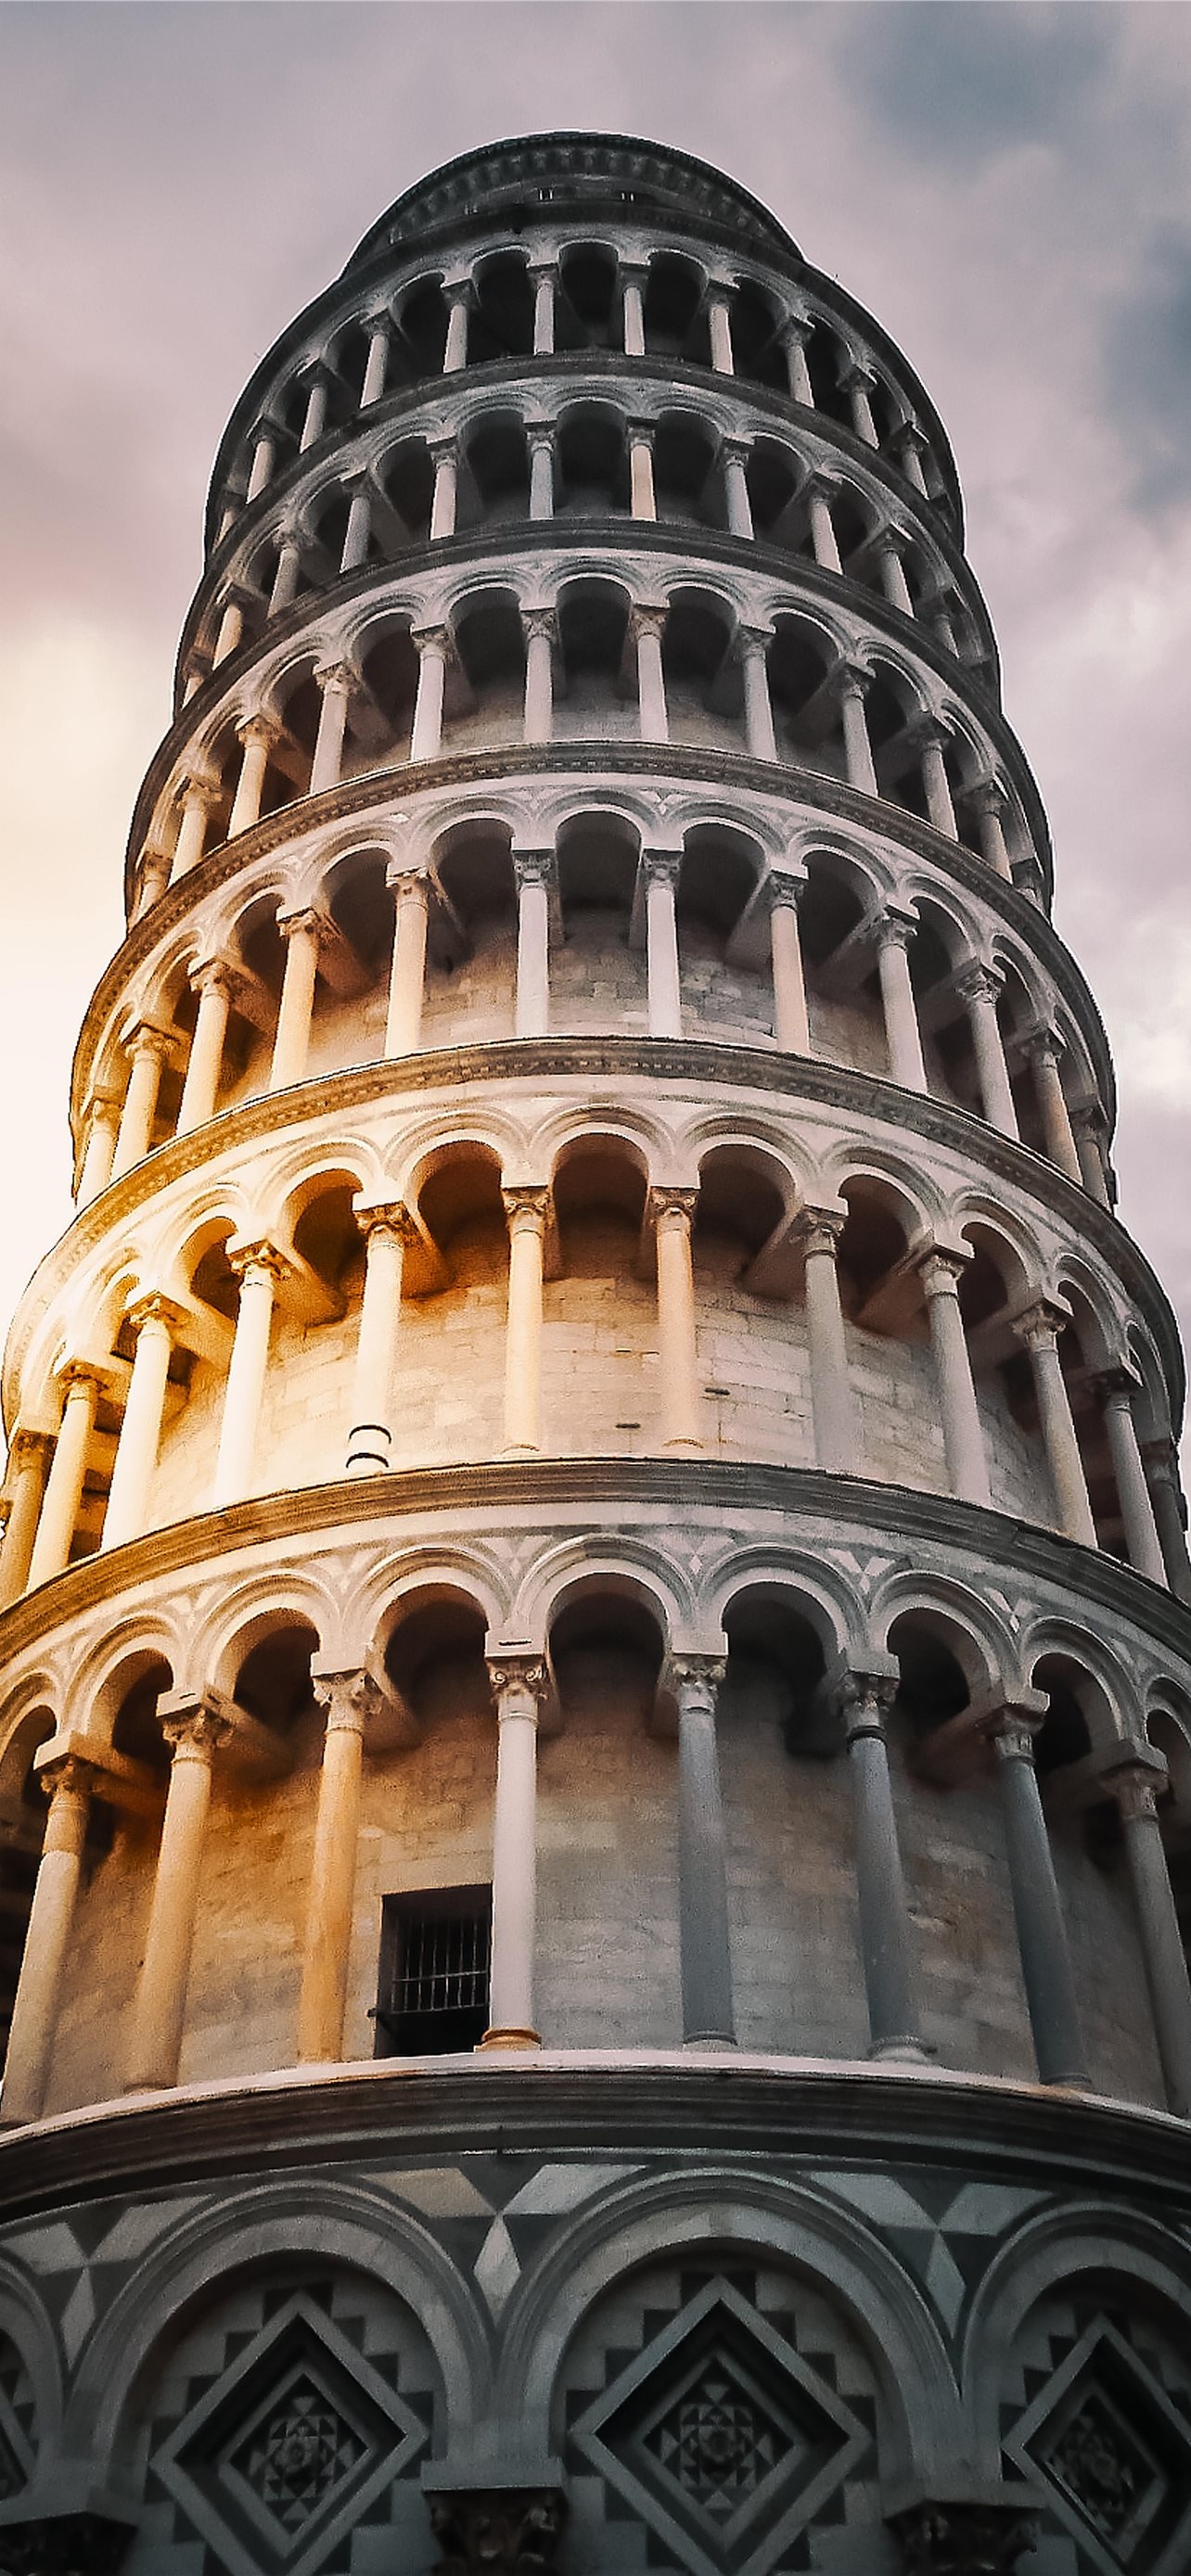 Best Pisa iPhone wallpapers, High-quality images, Mobile backgrounds, Picture-perfect, 1290x2780 HD Handy